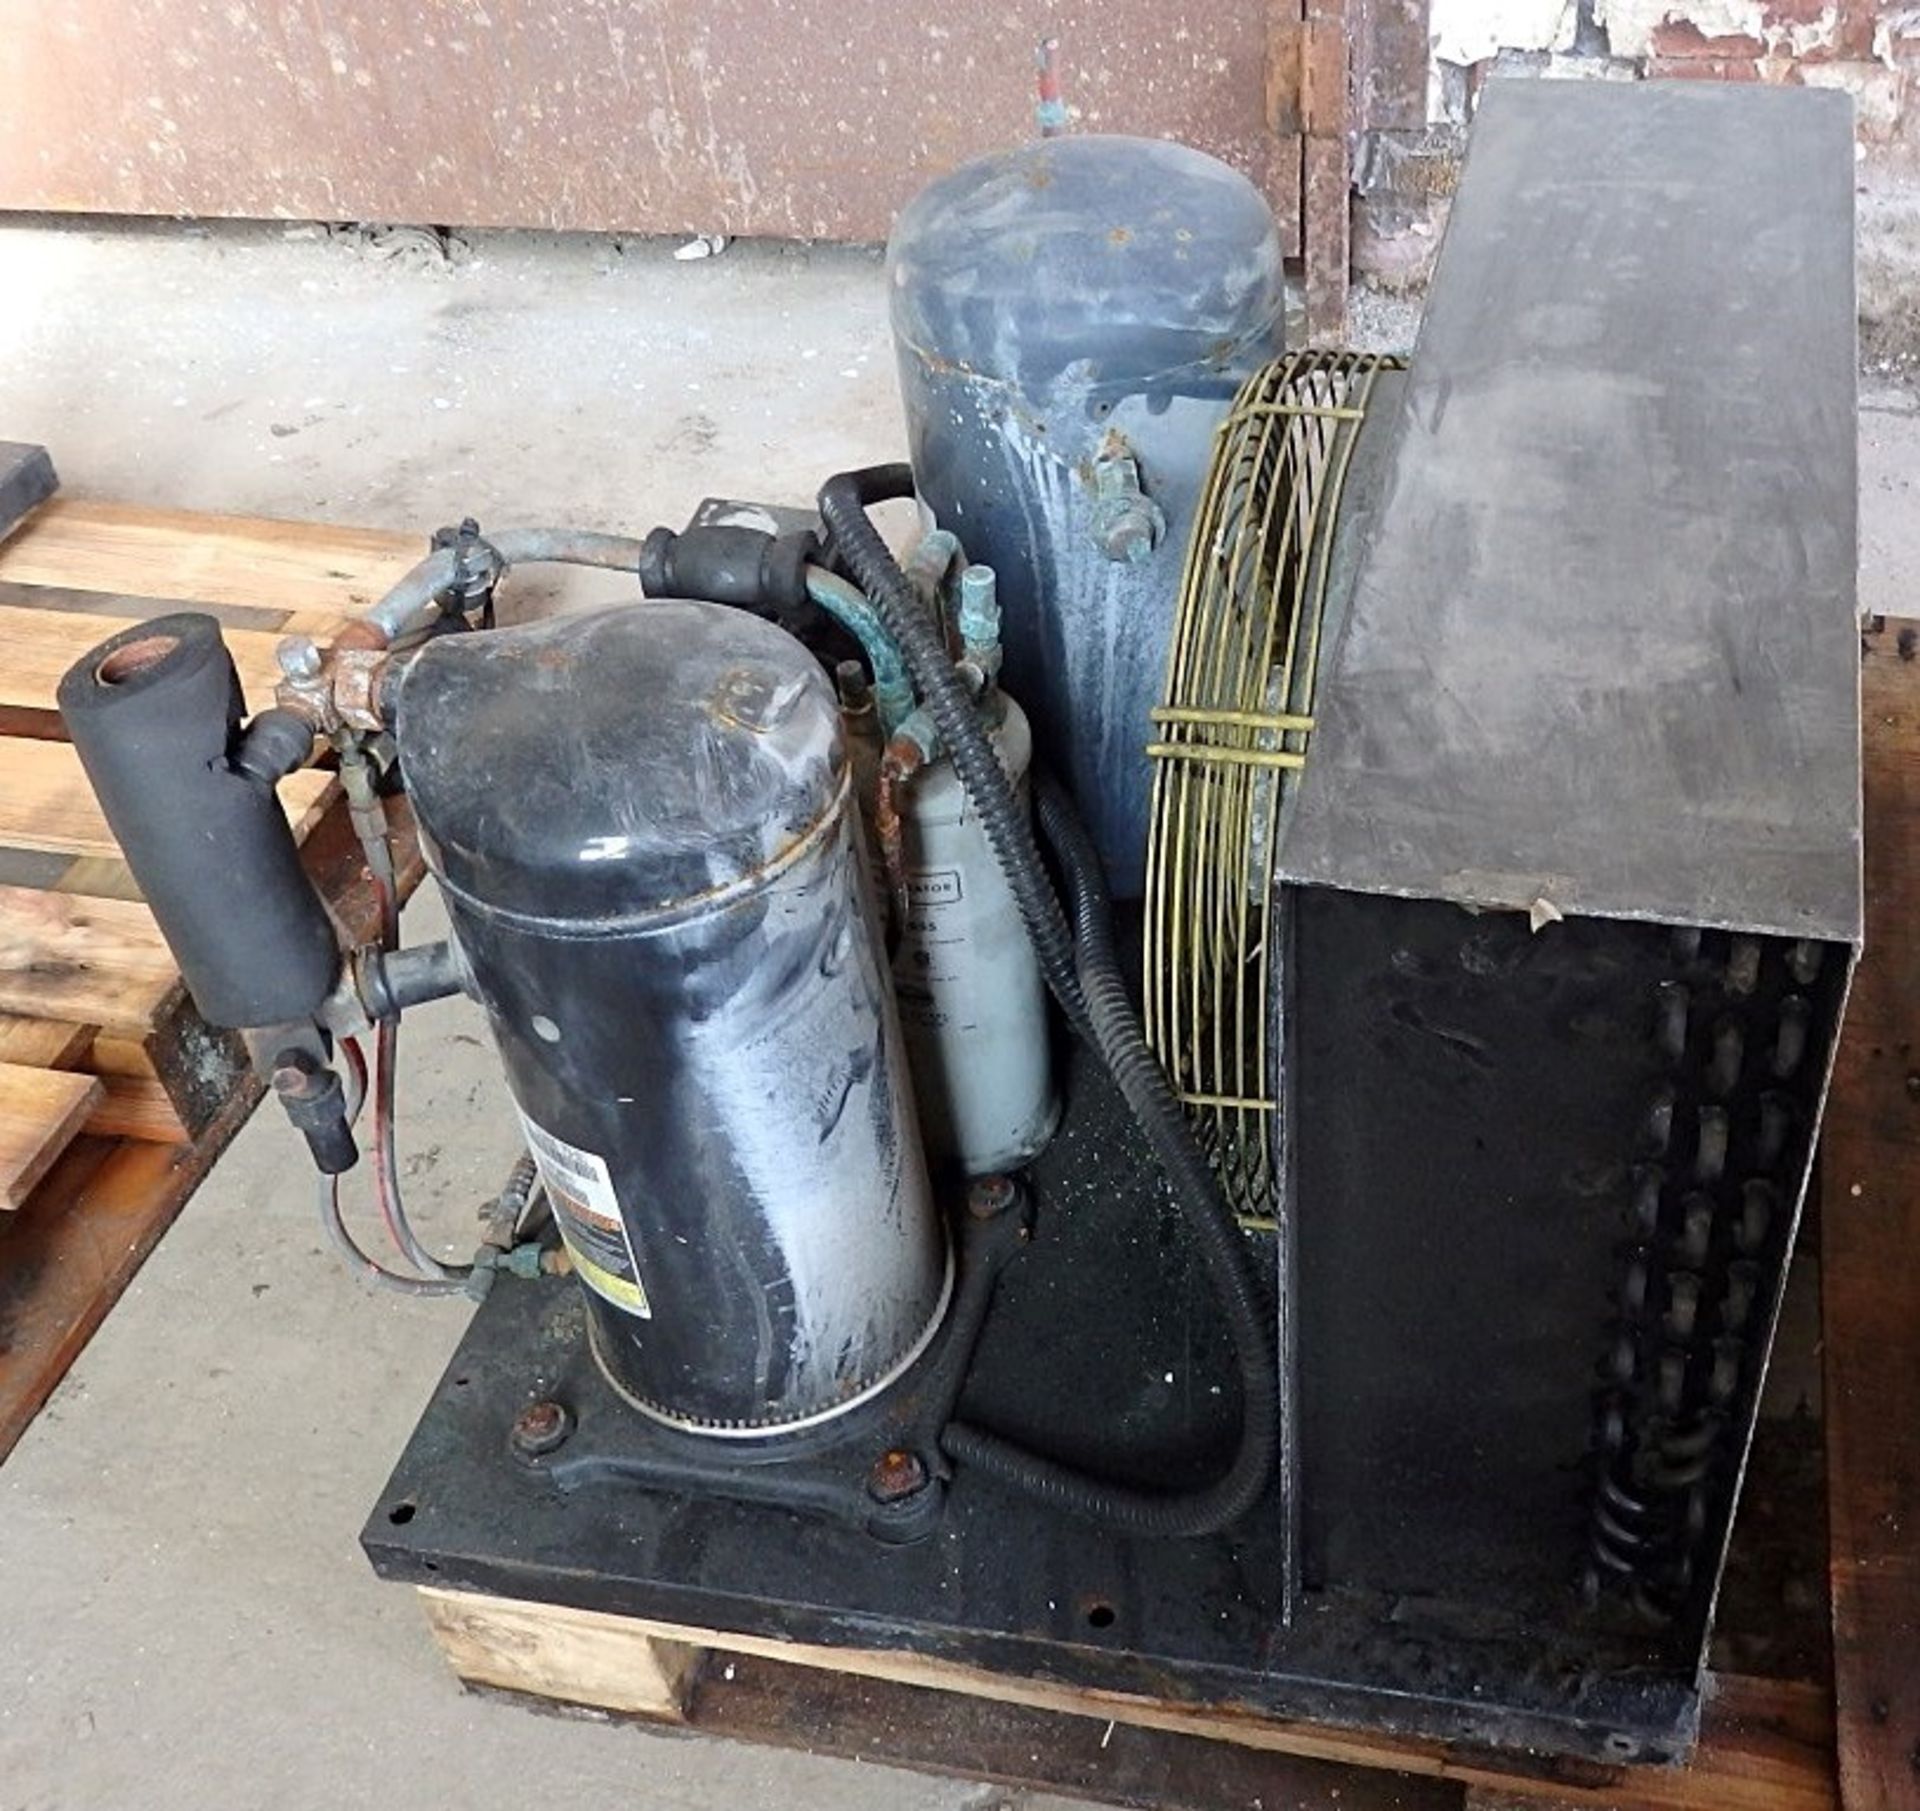 1 x Prestcold / Copeland Refrigeration Unit - Features Scroll Compressor & Fan - Used, Sold As - Image 3 of 8